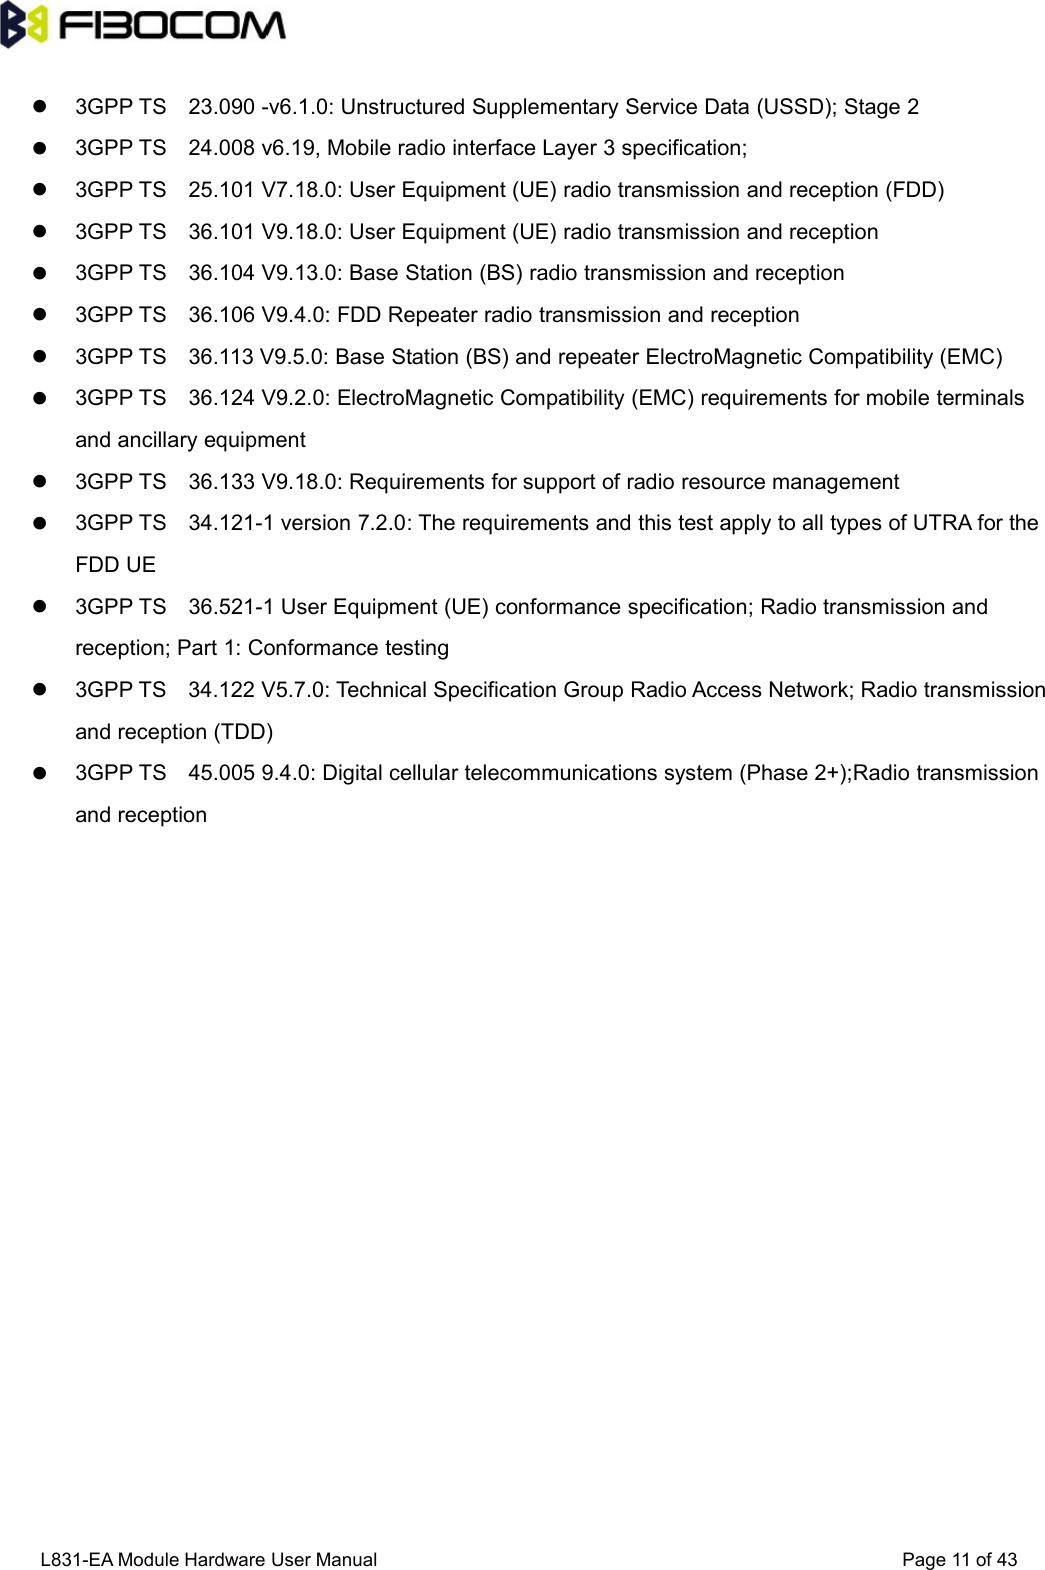 L831-EA Module Hardware User Manual Page11of433GPP TS 23.090 -v6.1.0: Unstructured Supplementary Service Data (USSD); Stage 23GPP TS 24.008 v6.19, Mobile radio interface Layer 3 specification;3GPP TS 25.101 V7.18.0: User Equipment (UE) radio transmission and reception (FDD)3GPP TS 36.101 V9.18.0: User Equipment (UE) radio transmission and reception3GPP TS 36.104 V9.13.0: Base Station (BS) radio transmission and reception3GPP TS 36.106 V9.4.0: FDD Repeater radio transmission and reception3GPP TS 36.113 V9.5.0: Base Station (BS) and repeater ElectroMagnetic Compatibility (EMC)3GPP TS 36.124 V9.2.0: ElectroMagnetic Compatibility (EMC) requirements for mobile terminalsand ancillary equipment3GPP TS 36.133 V9.18.0: Requirements for support of radio resource management3GPP TS 34.121-1 version 7.2.0: The requirements and this test apply to all types of UTRA for theFDD UE3GPP TS 36.521-1 User Equipment (UE) conformance specification; Radio transmission andreception; Part 1: Conformance testing3GPP TS 34.122 V5.7.0: Technical Specification Group Radio Access Network; Radio transmissionand reception (TDD)3GPP TS 45.005 9.4.0: Digital cellular telecommunications system (Phase 2+);Radio transmissionand reception